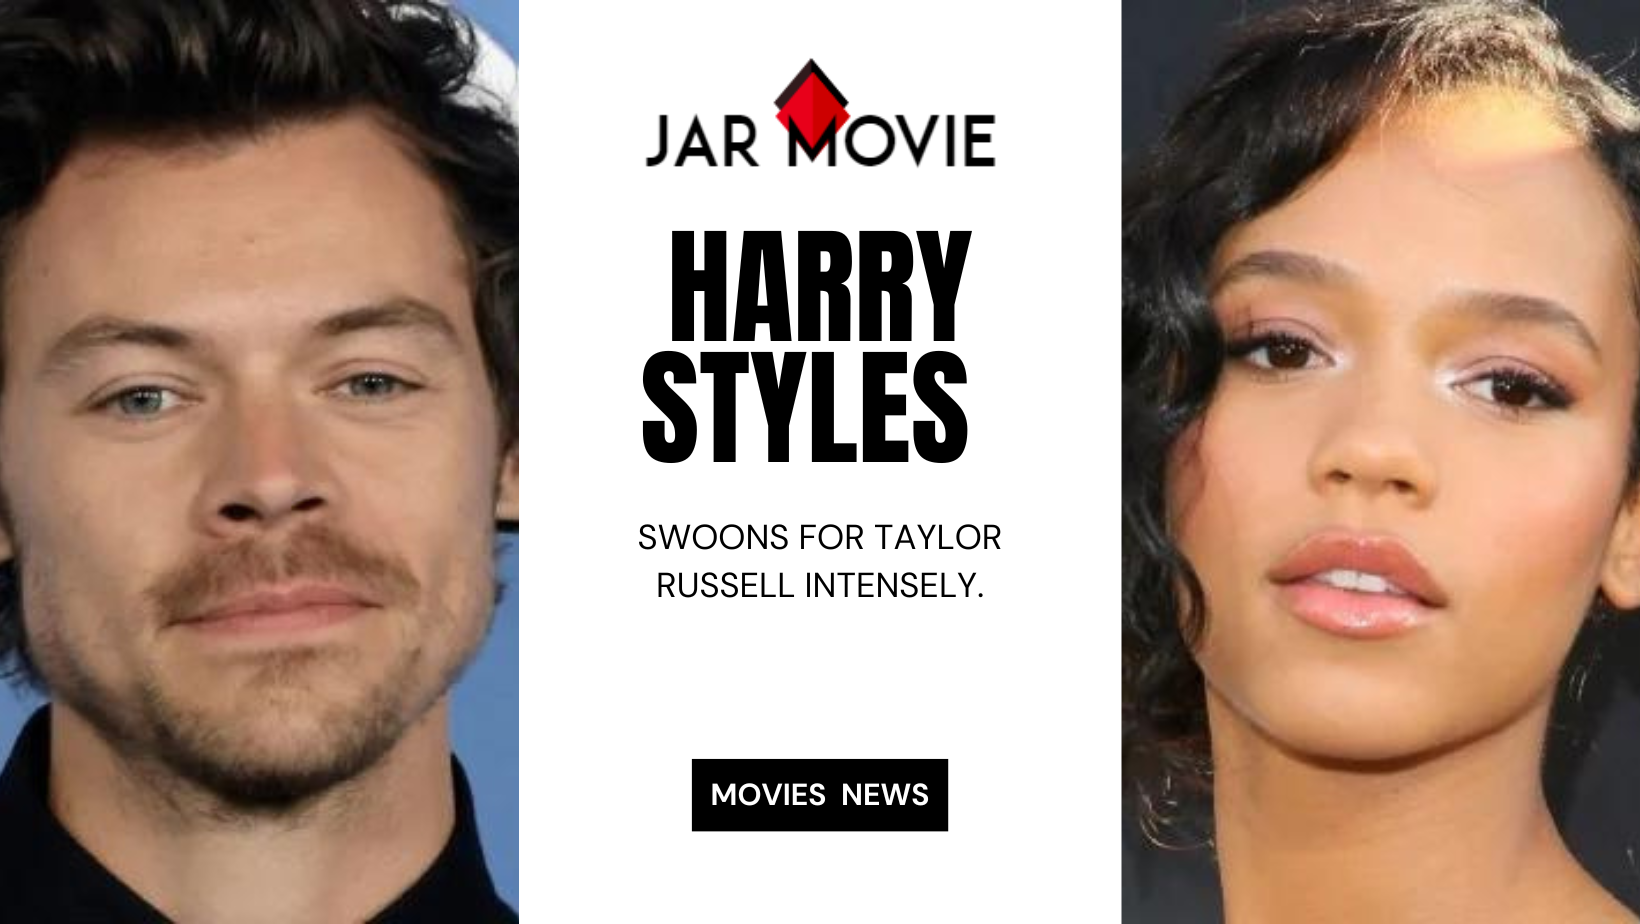 Harry Styles swoons for Taylor Russell intensely.